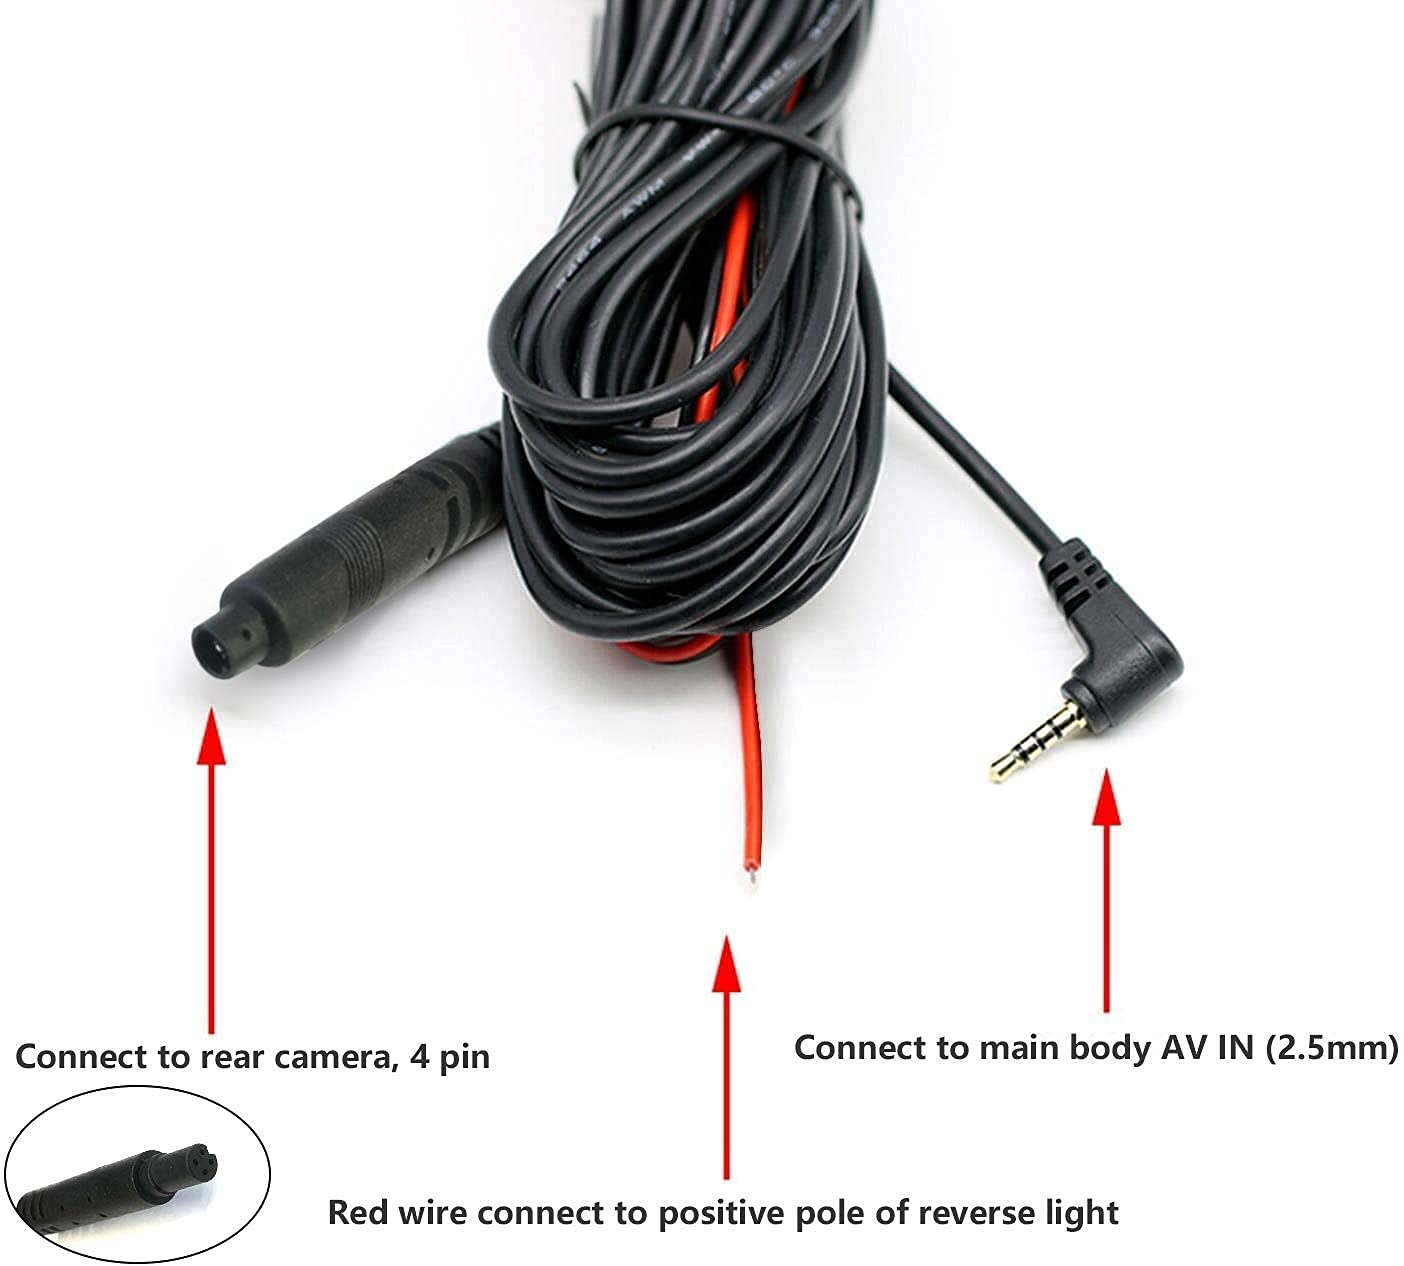 WOLFBOX 50 Feet Rear Cam Extended Cord Cable  wolfboxdashcamera   